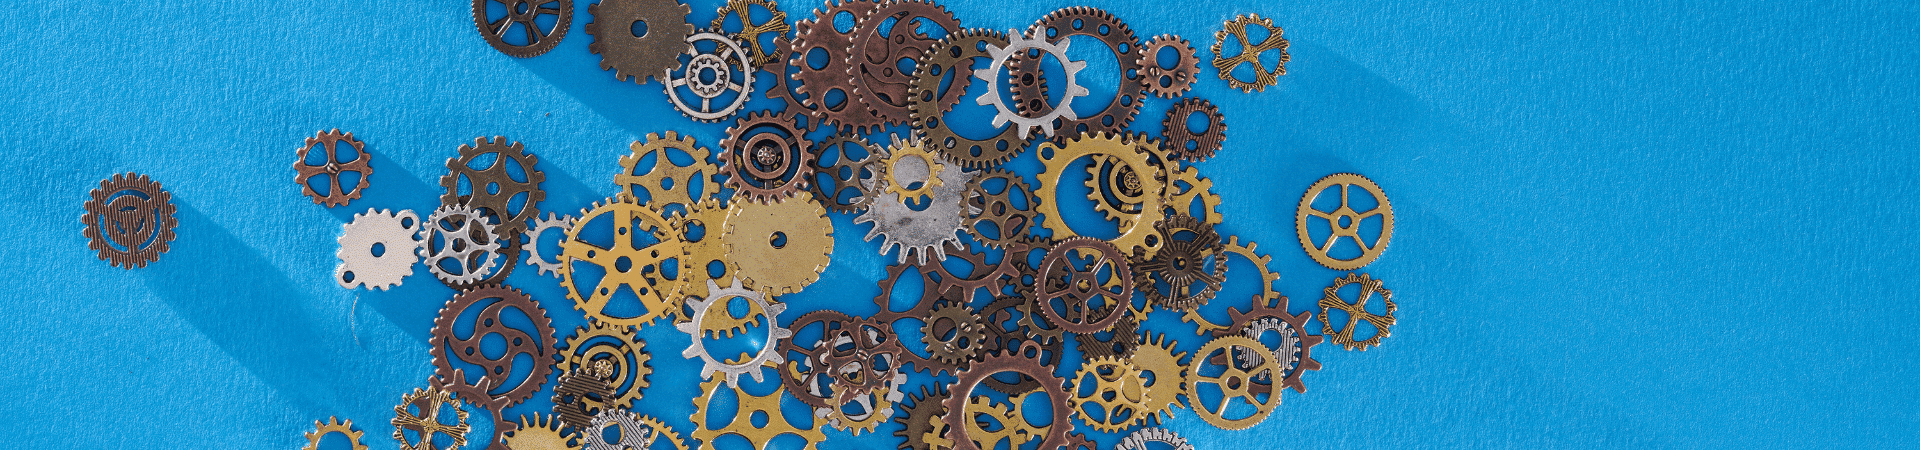 From risk to opportunity: A flywheel approach to sanctions compliance